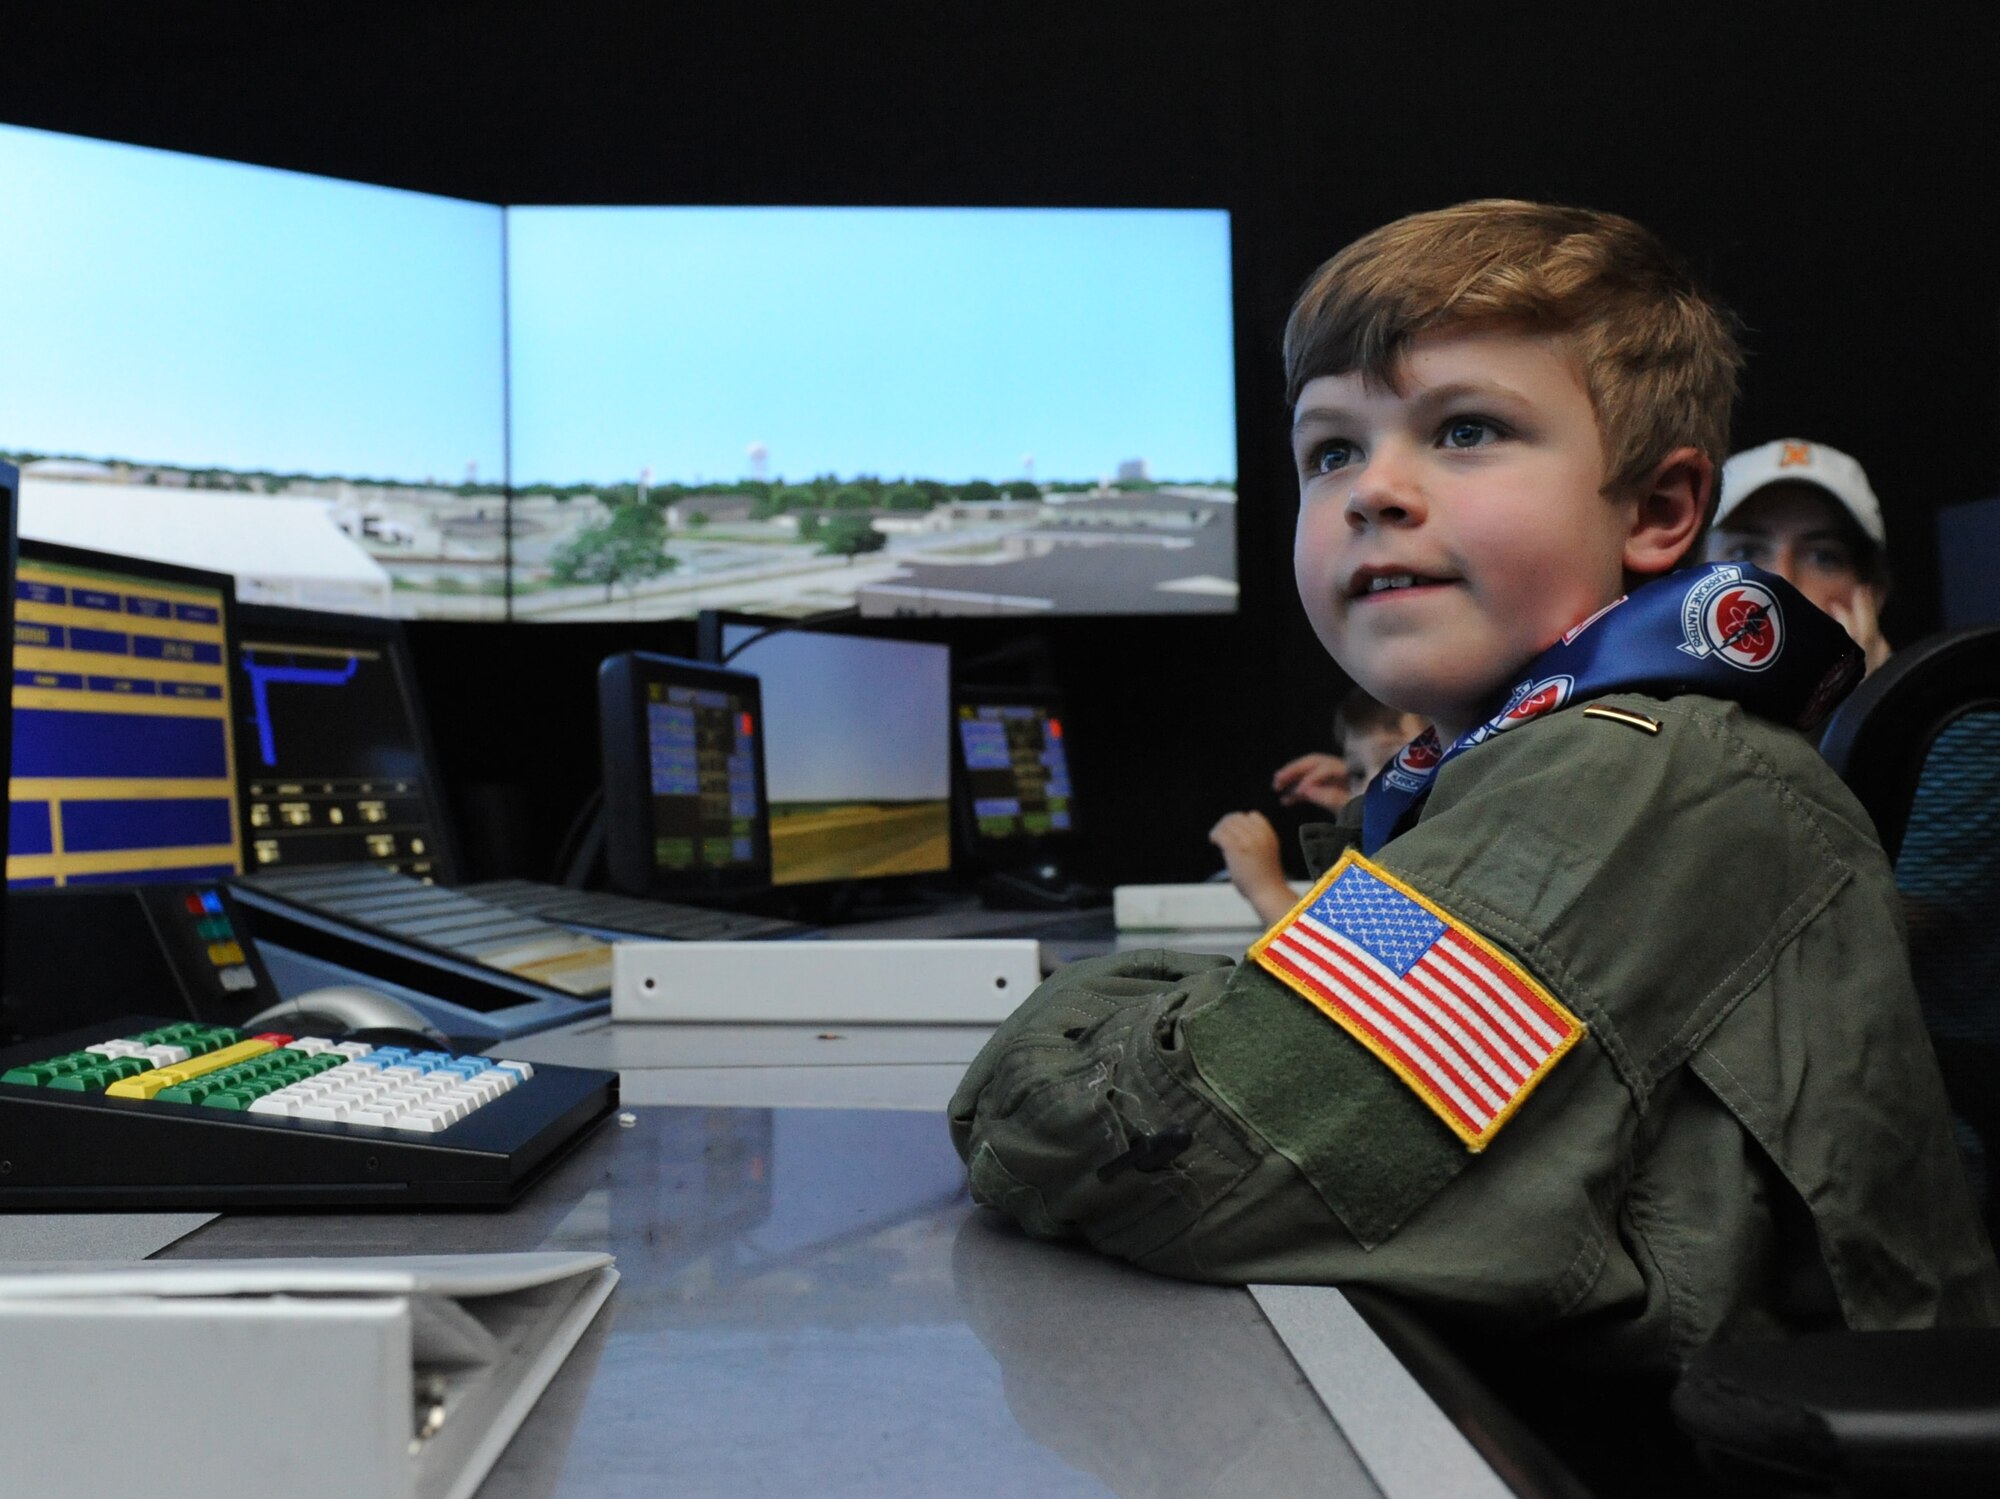 Jon Bryant “JB” Orso receives a tour of an air traffic control tower simulator during the 403rd Wing’s first Pilot for a Day event April 26, 2016, Keesler Air Force Base, Miss. Orso, who served as an honorary Air Force Reserve second lieutenant, is in remission after receiving treatment for Acute Lymphoblastic Leukemia. Pilot for a Day is a community outreach program for children who live with a chronic or life-threatening disease or illness. (U.S. Air Force photo by Kemberly Groue)